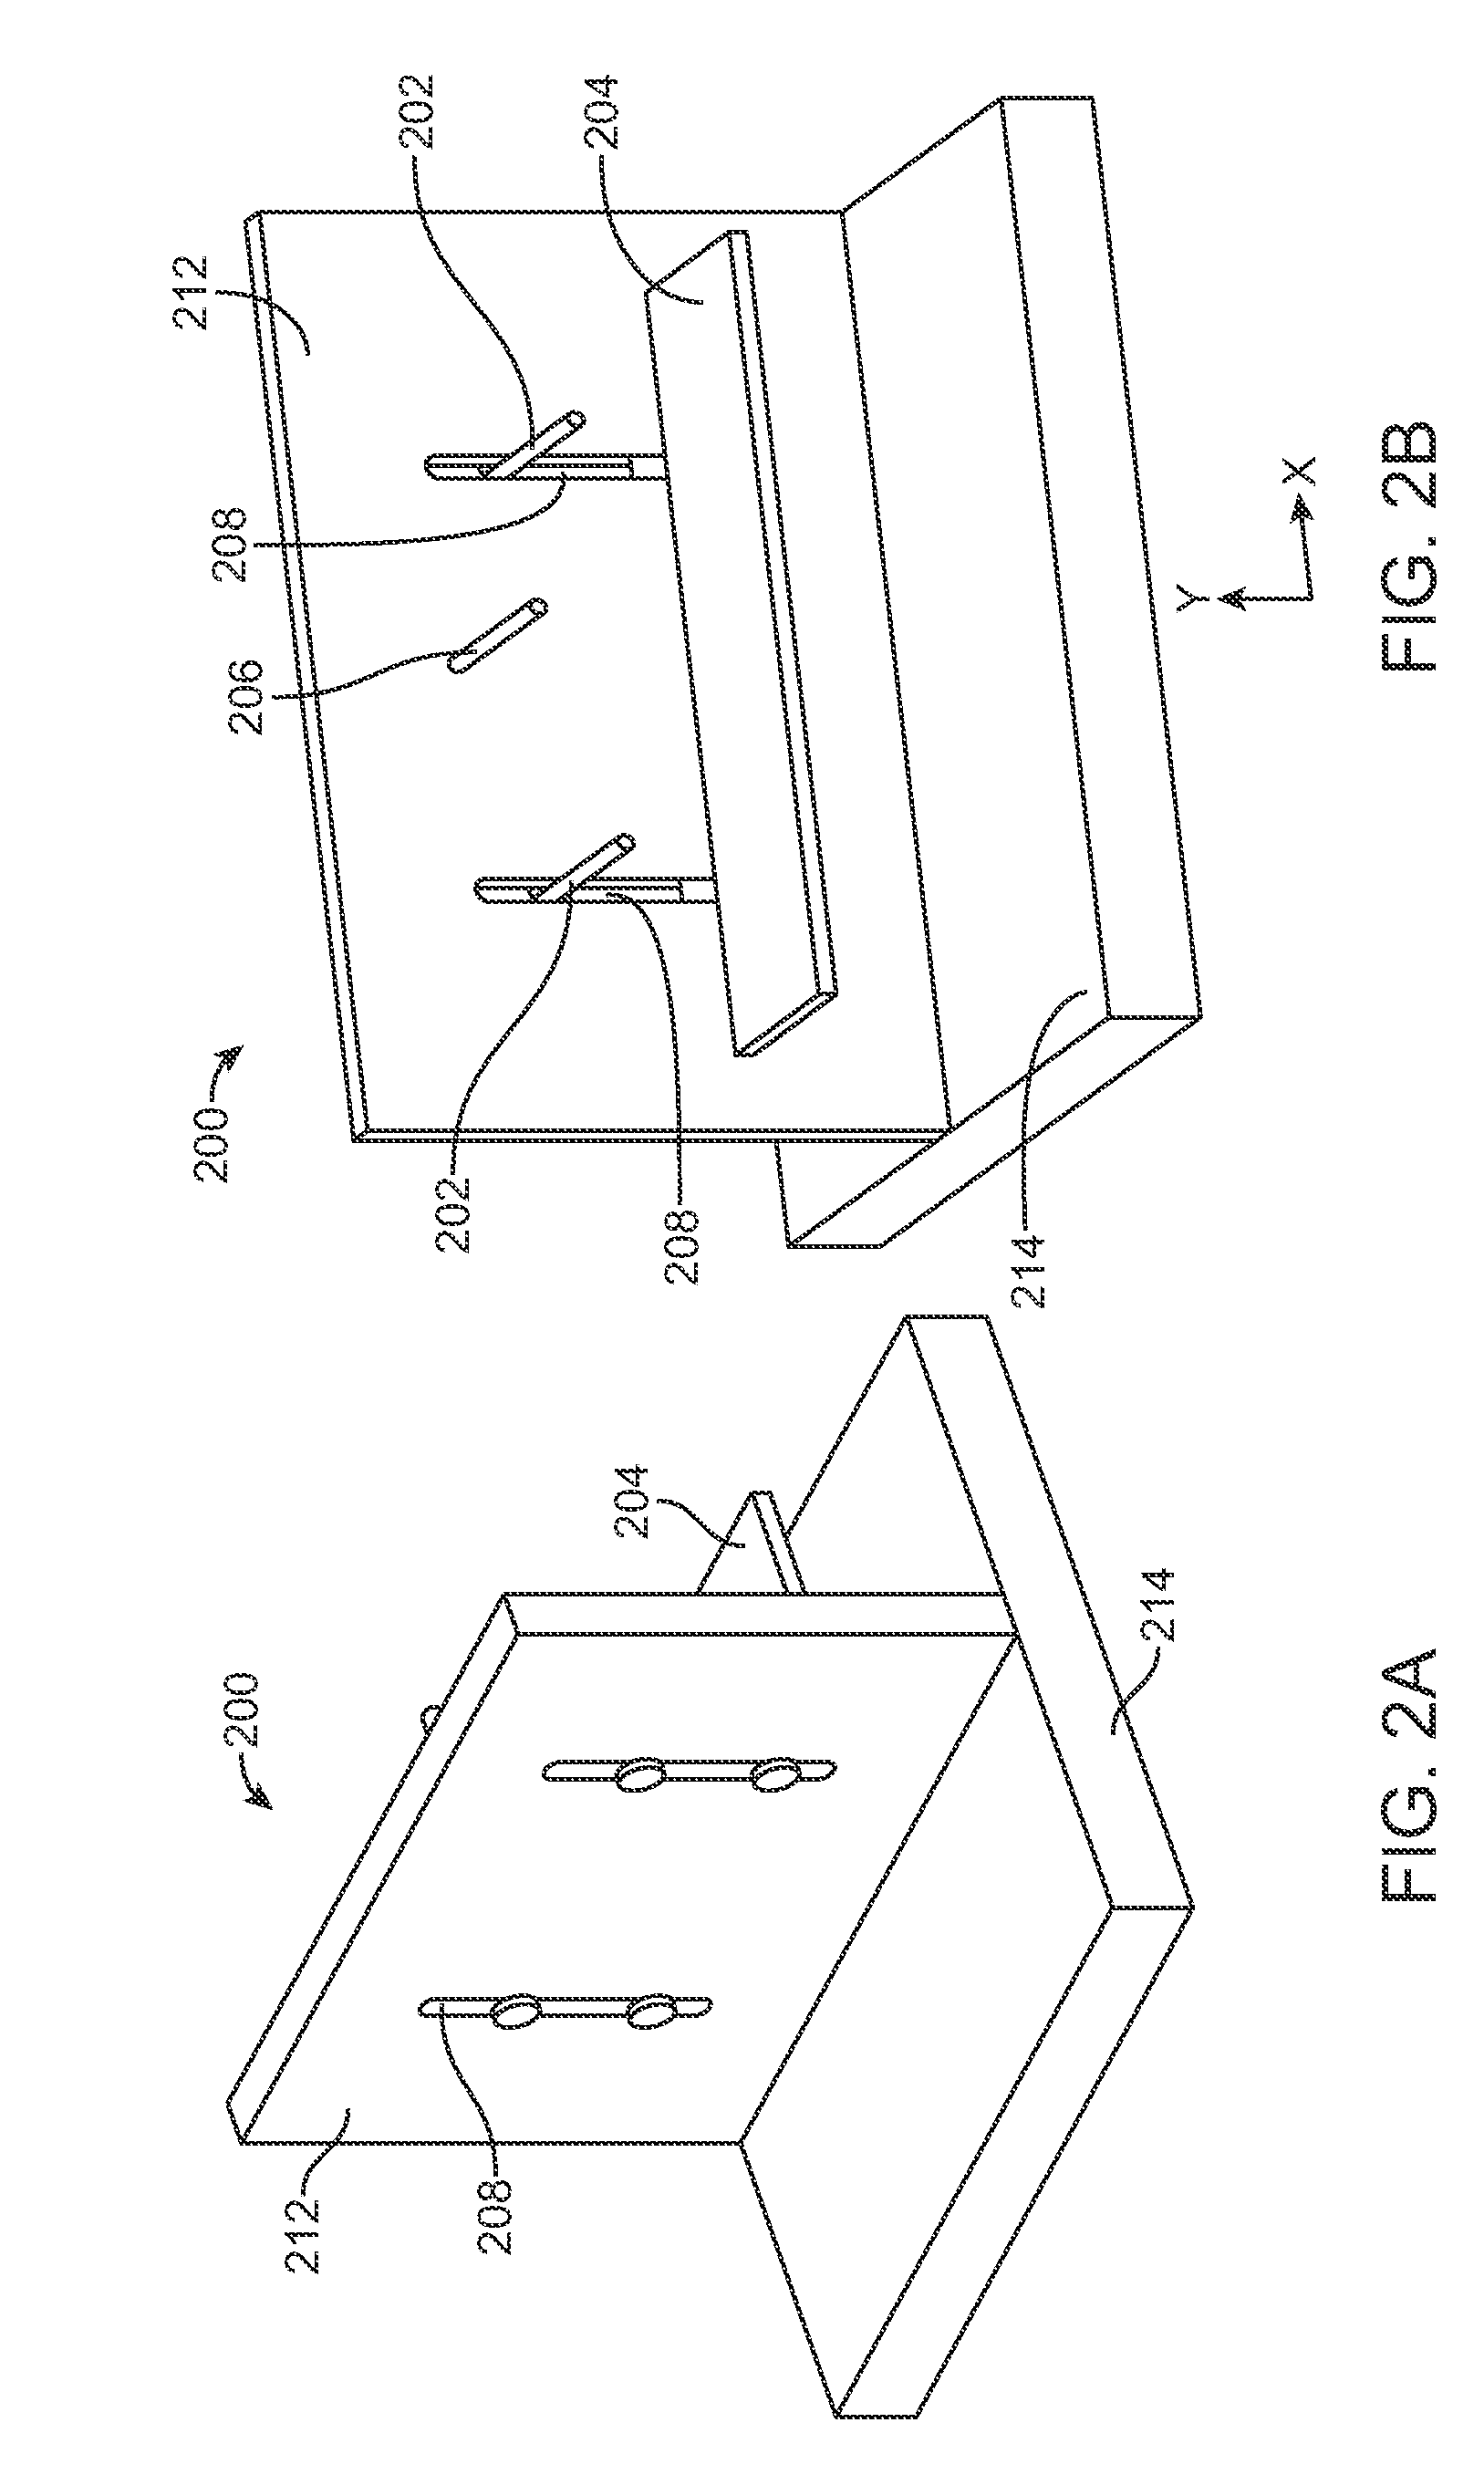 Droop Tester Apparatus and Method